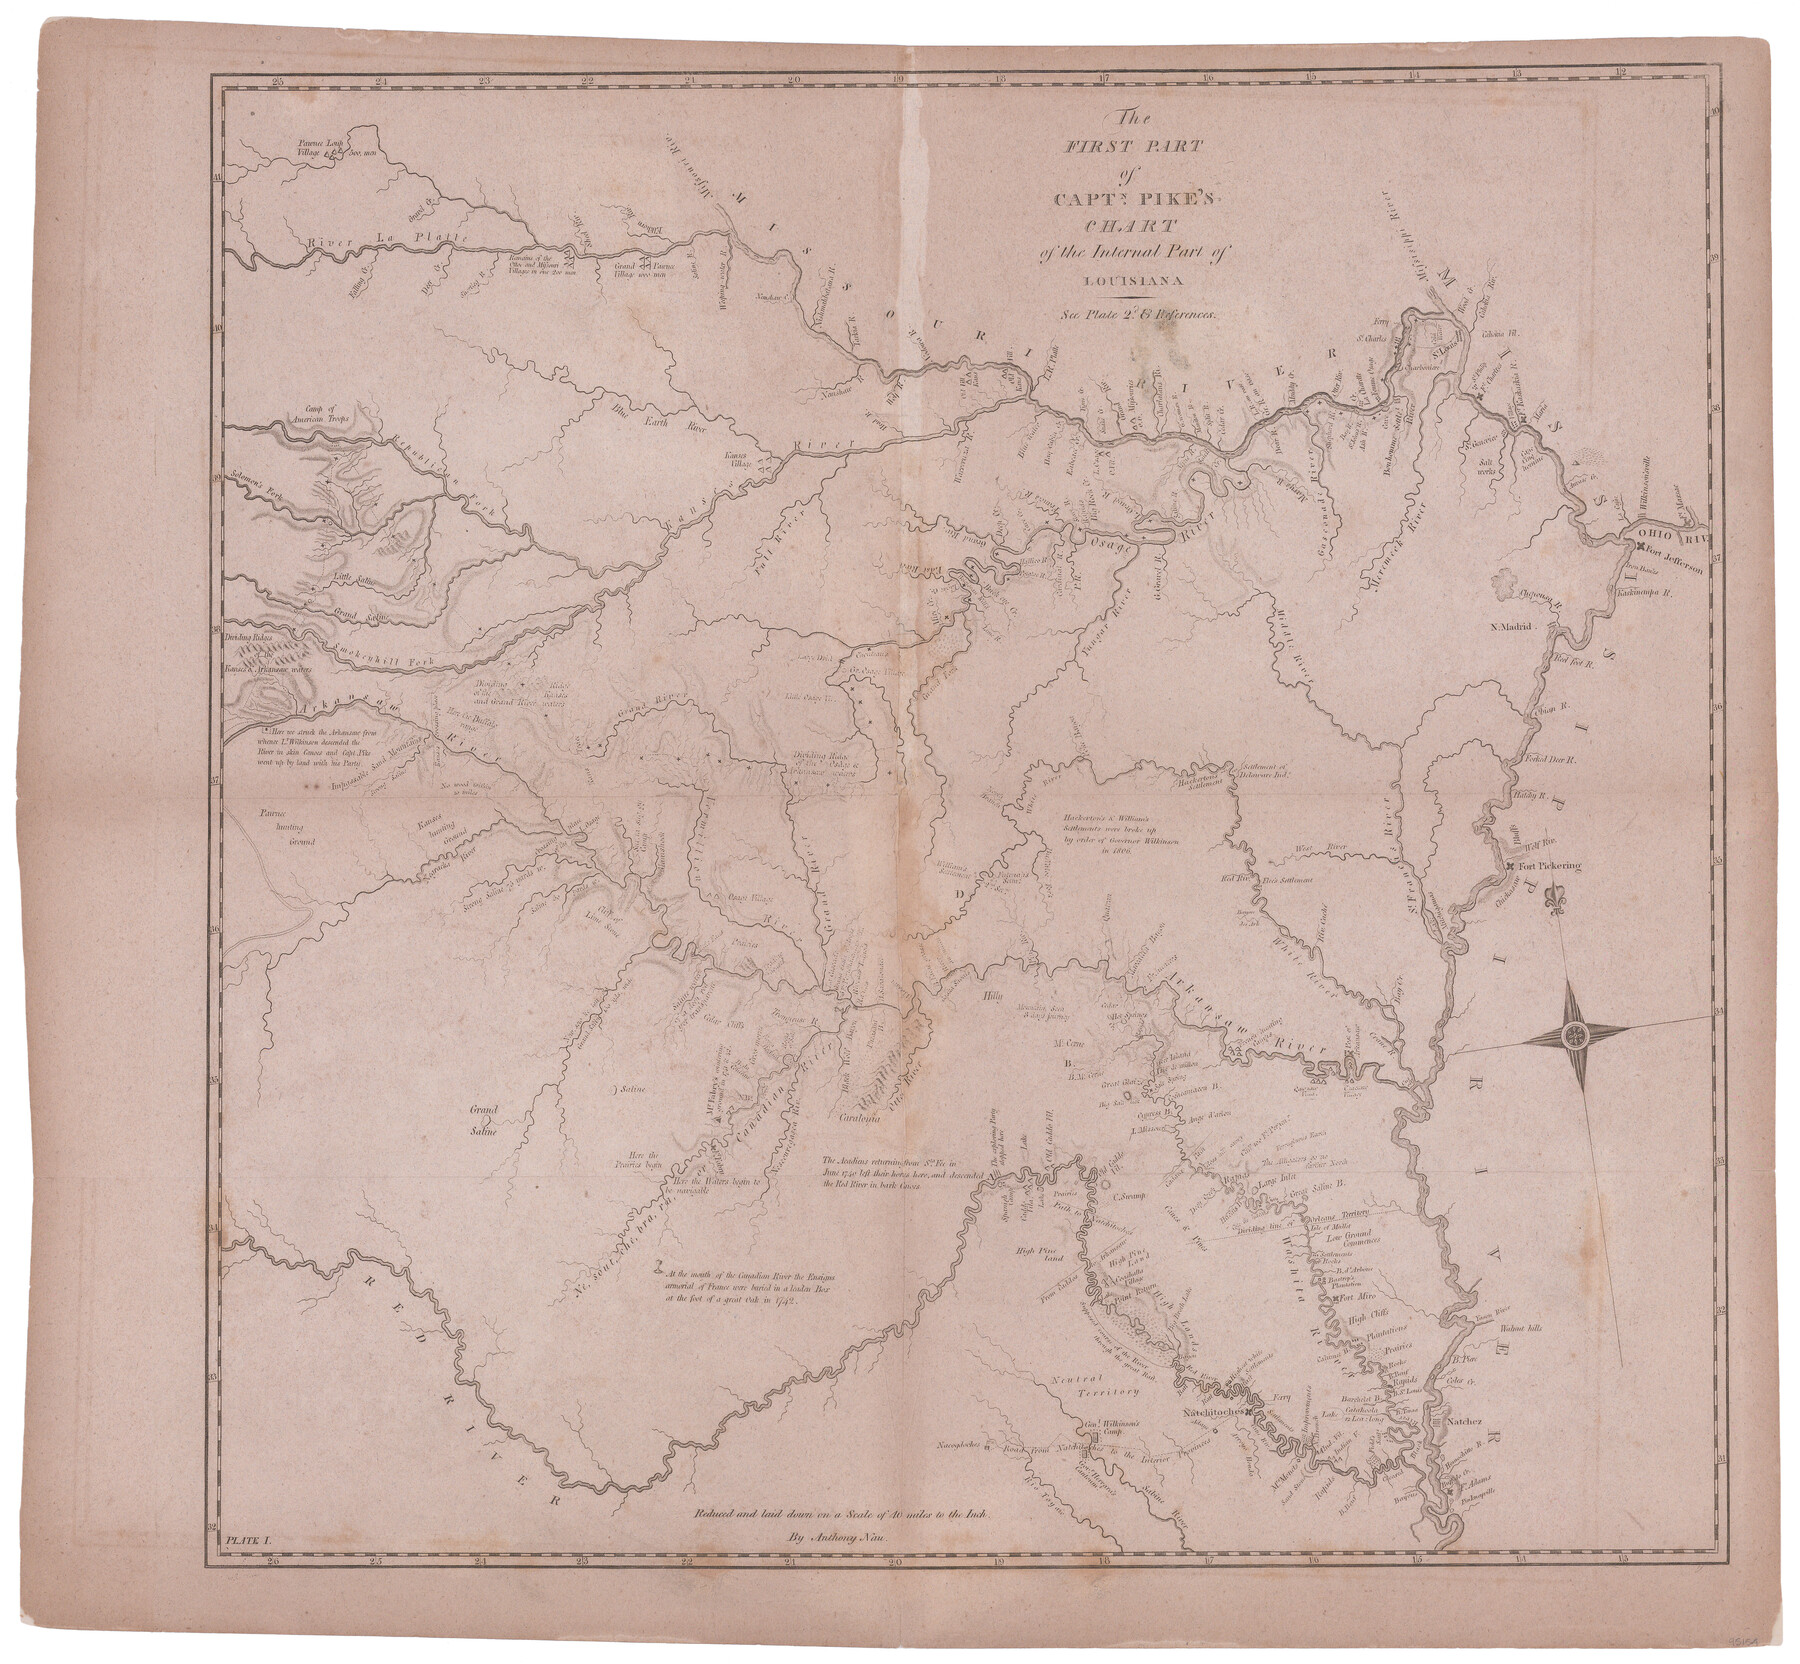 95154, The First Part of Captn. Pike's Chart of the Internal Part of Louisiana, General Map Collection